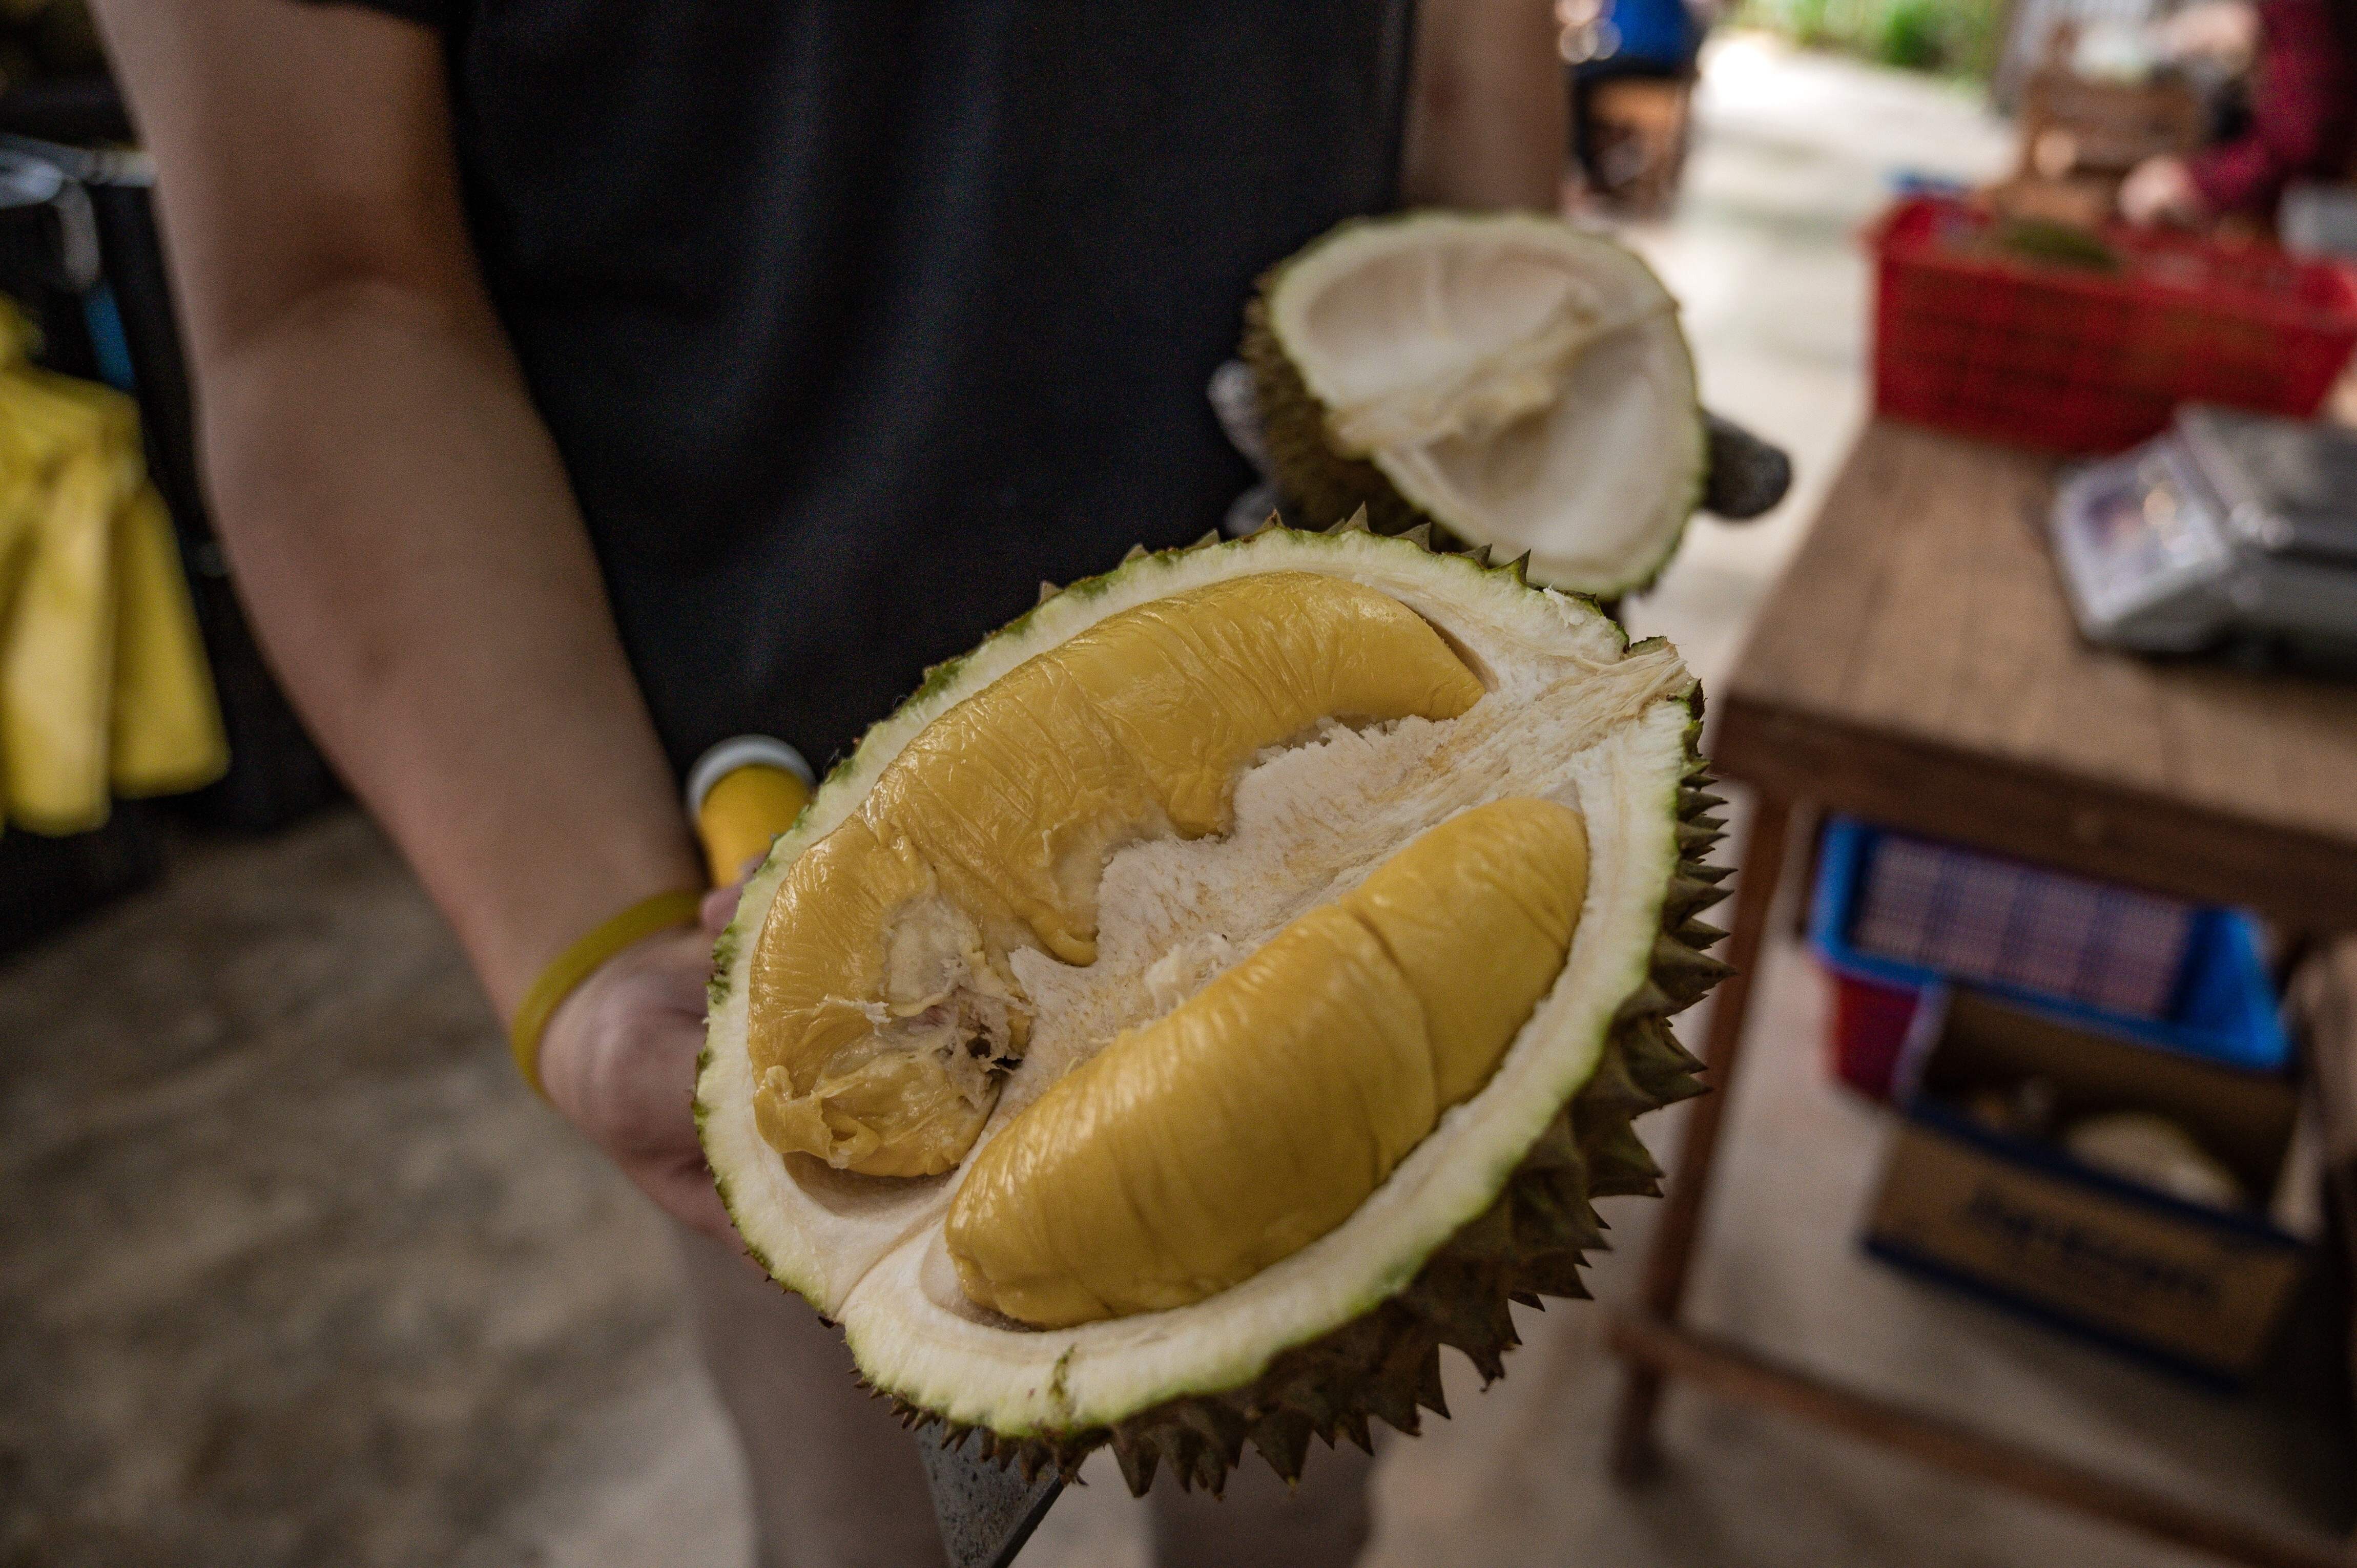 A worker shows a ‘Musang King’ durian at a shop in Kuala Lumpur last year. Photo: AFP